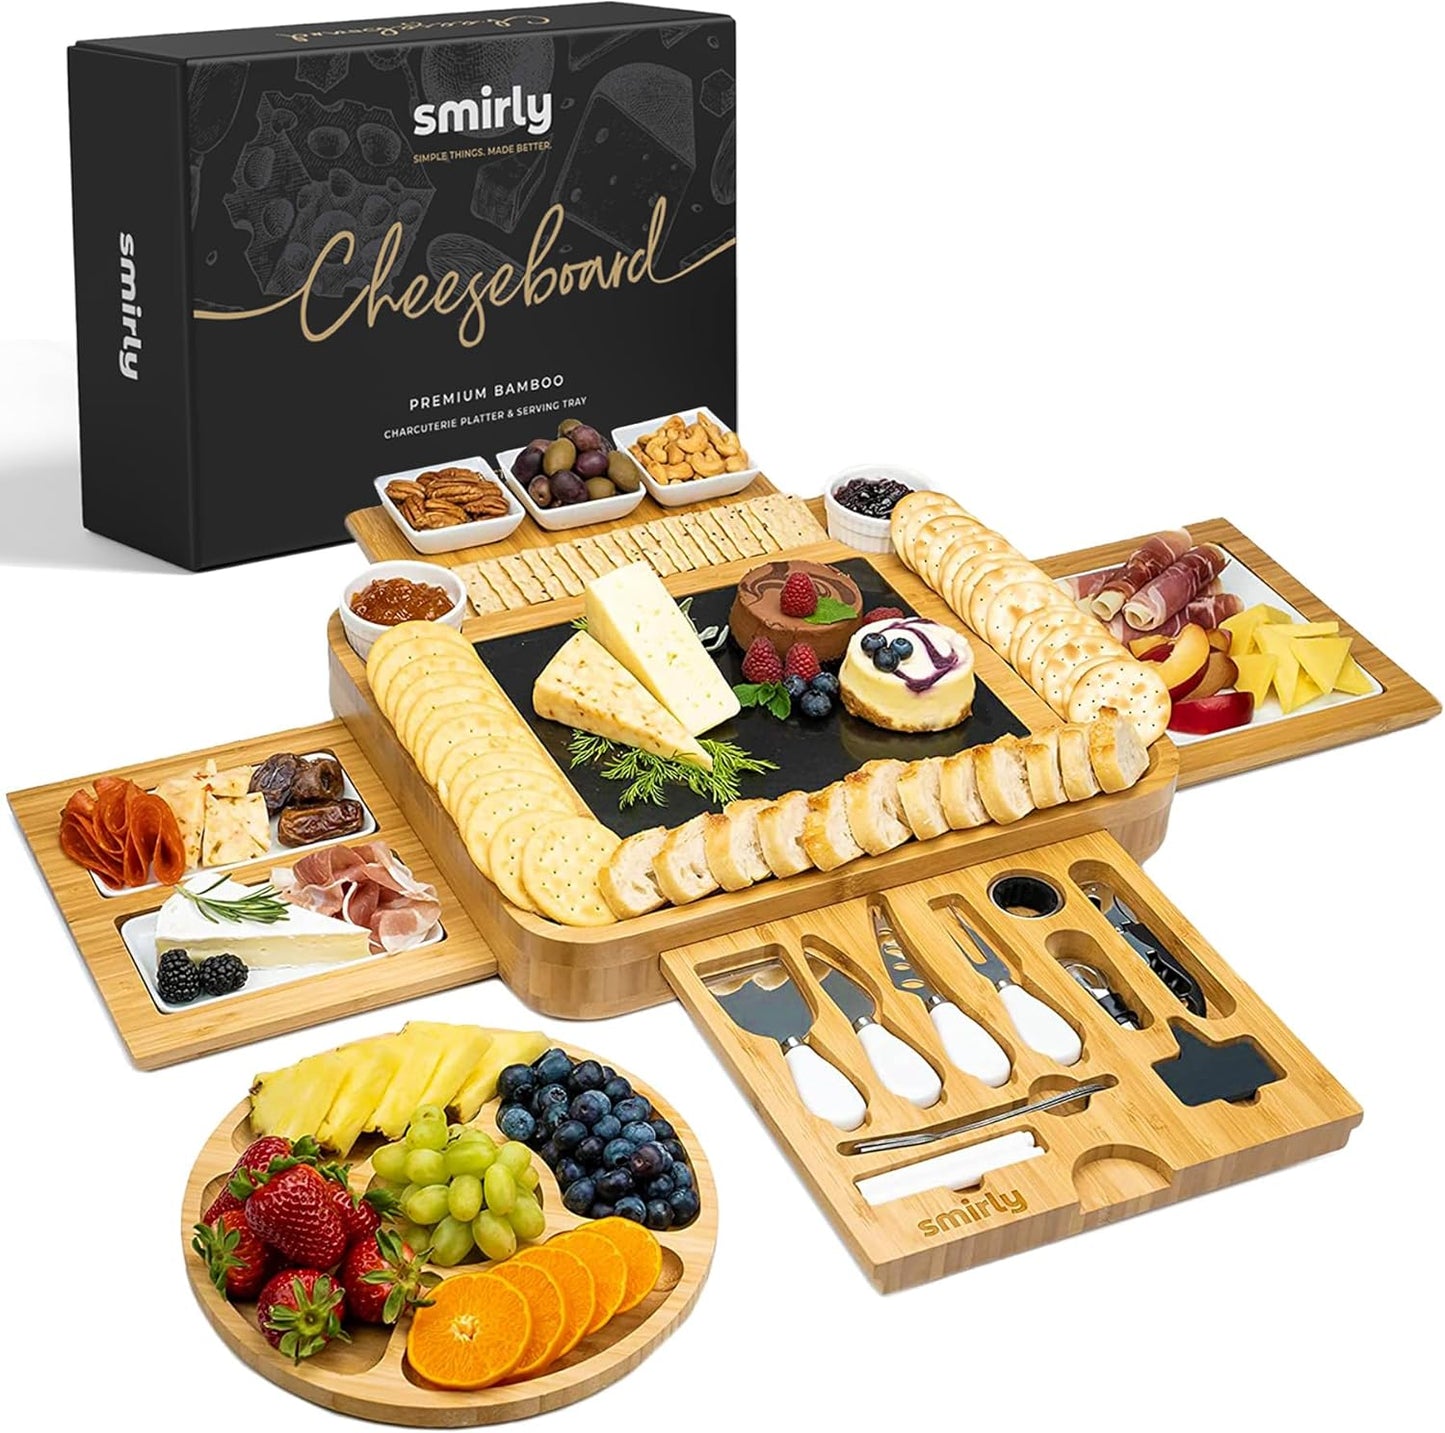 Charcuterie Board Gift Set: Large Bamboo Cheese Board - Unique Mother's Day, Housewarming, Wedding, Bridal Shower Present